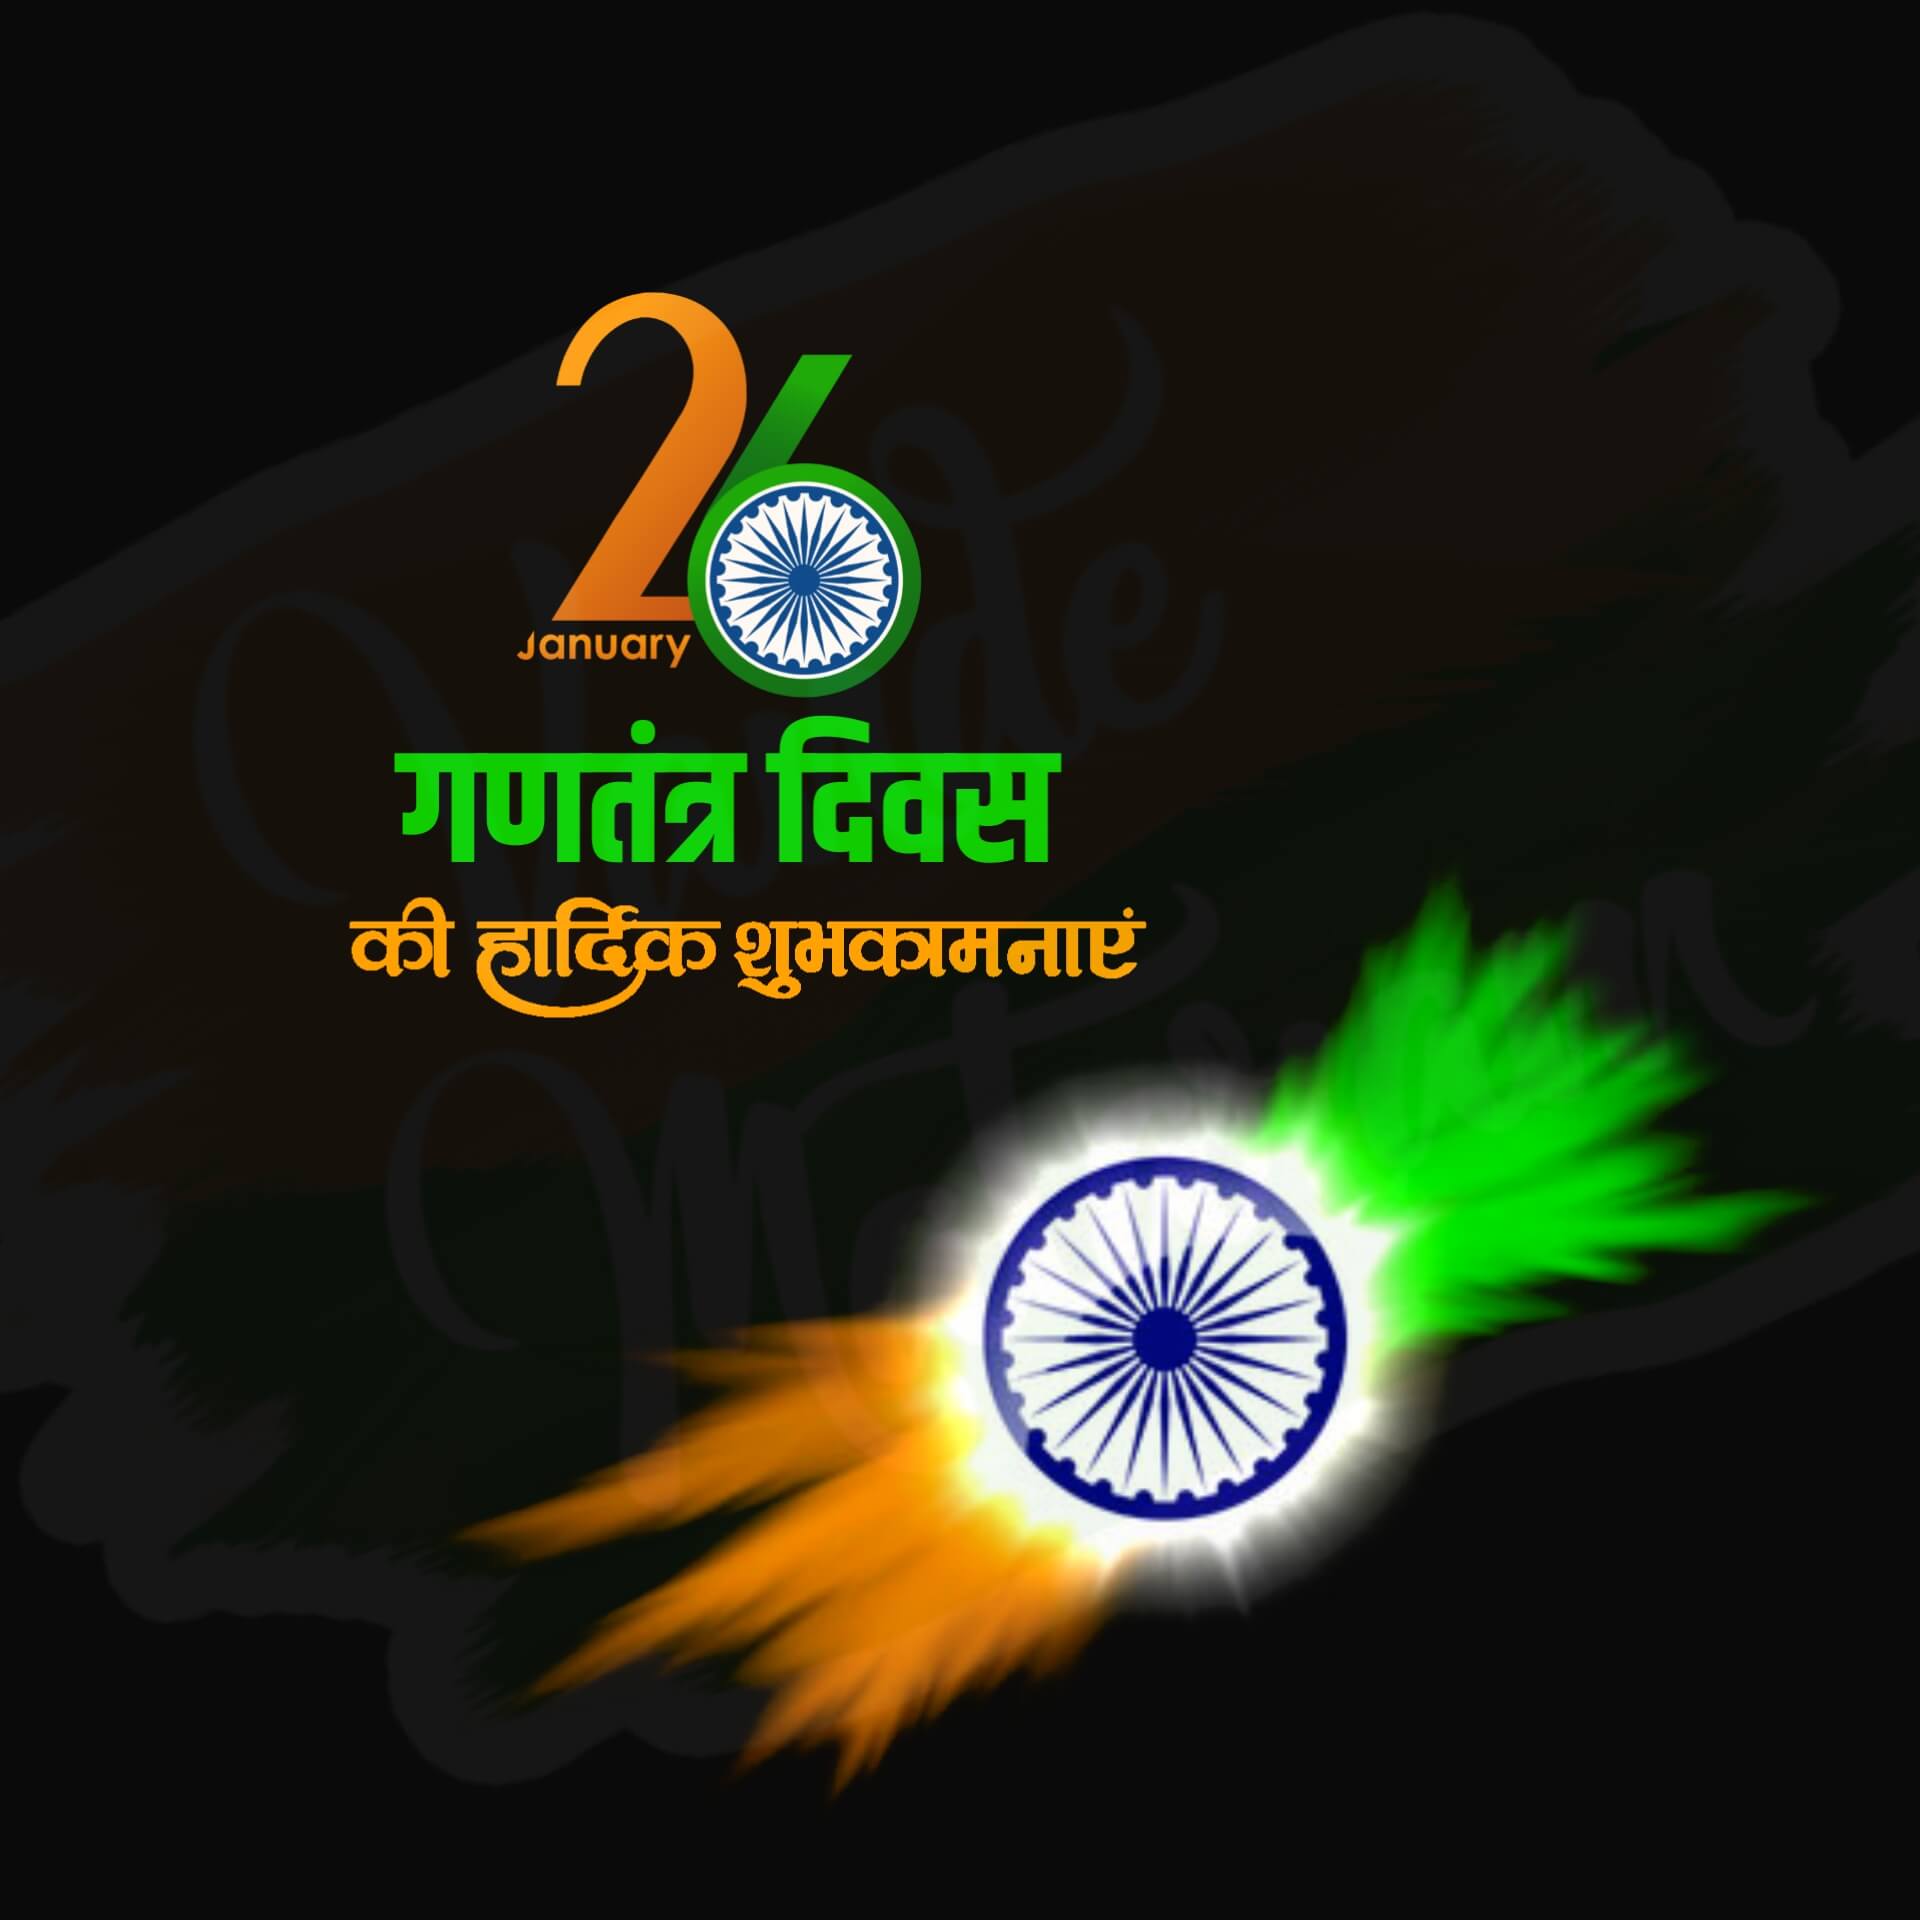 Republic Day Images in Hindi